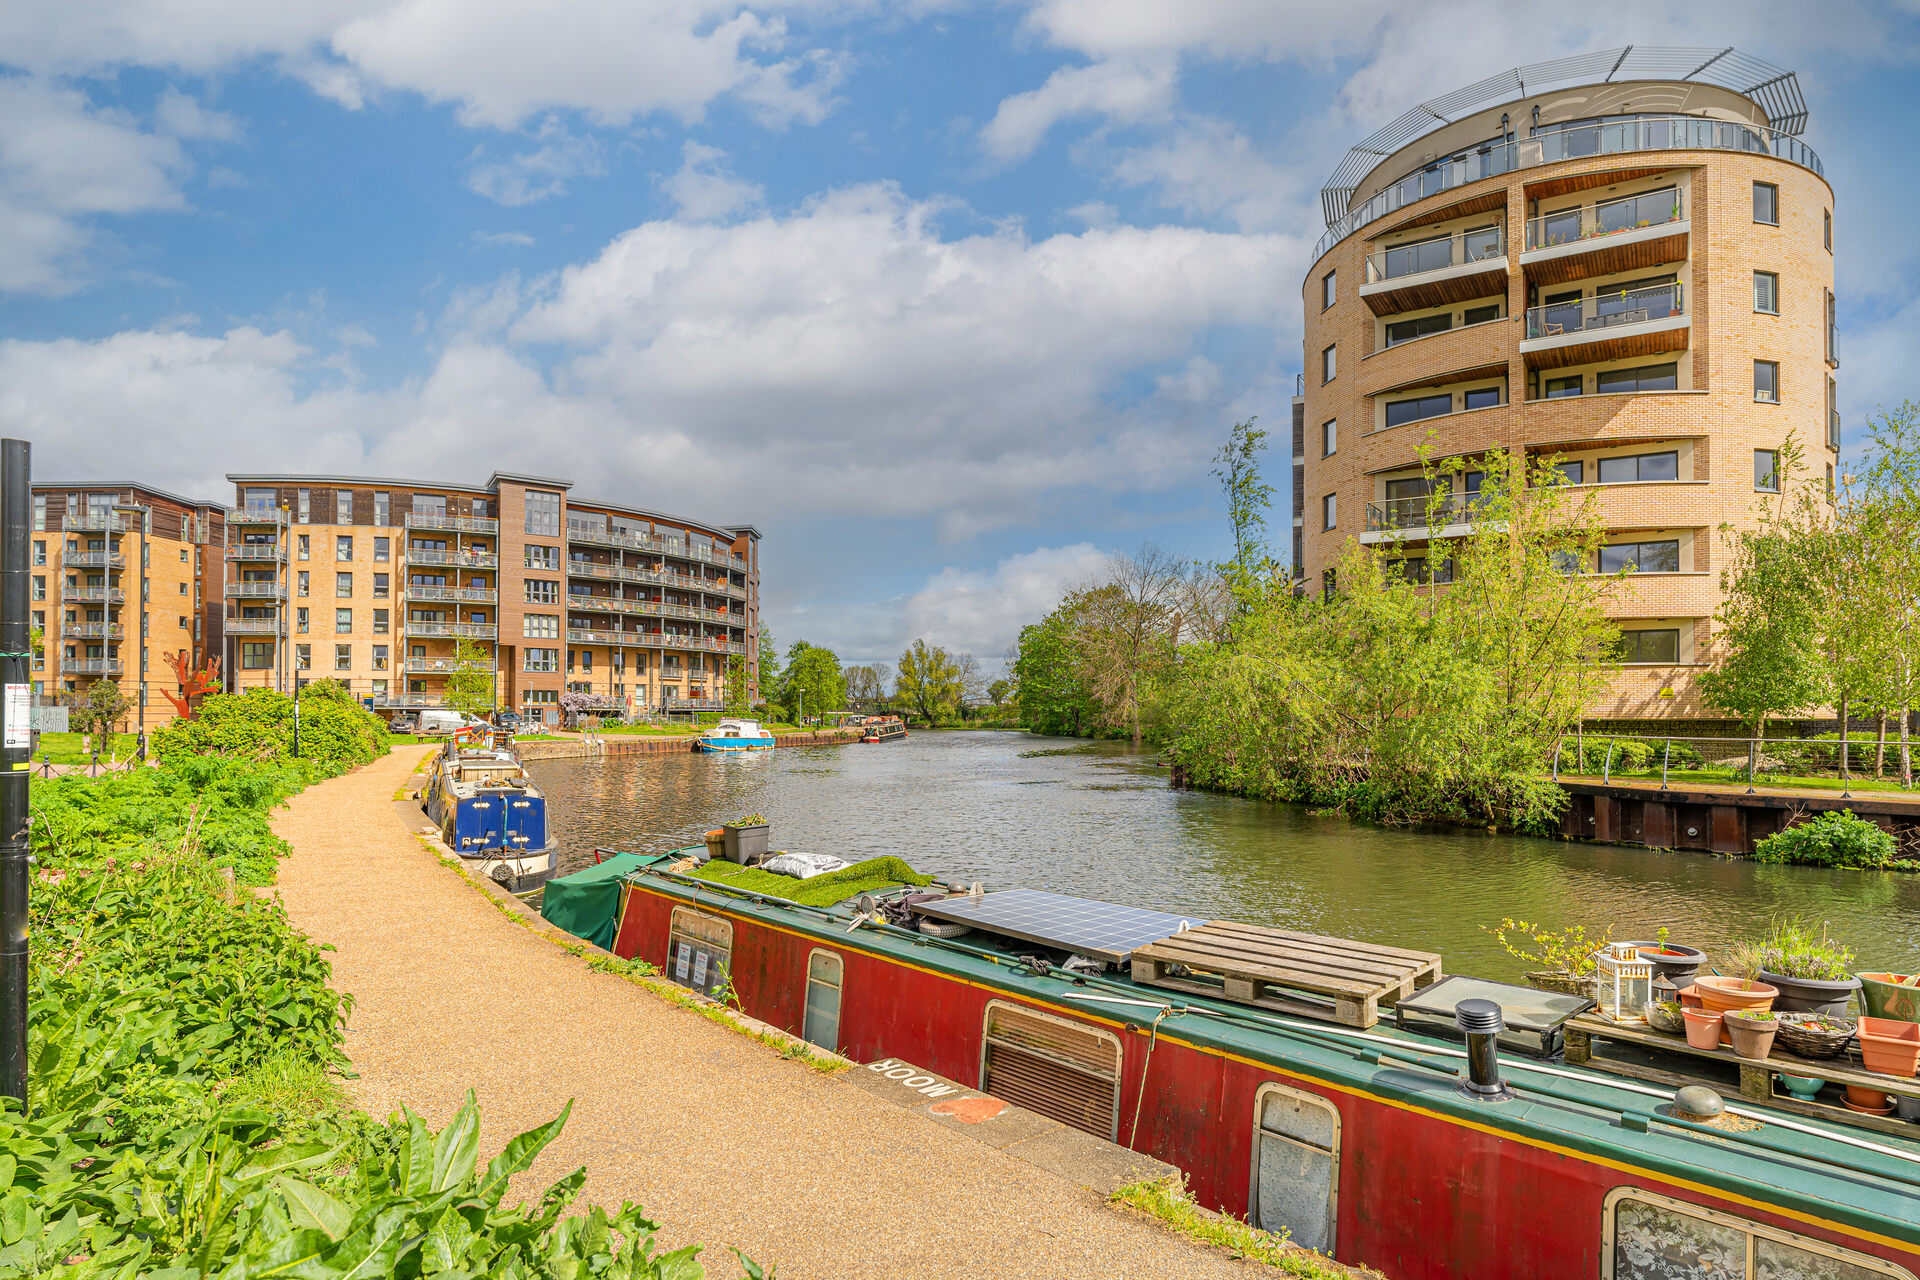 Flats and canal boats in Hackney